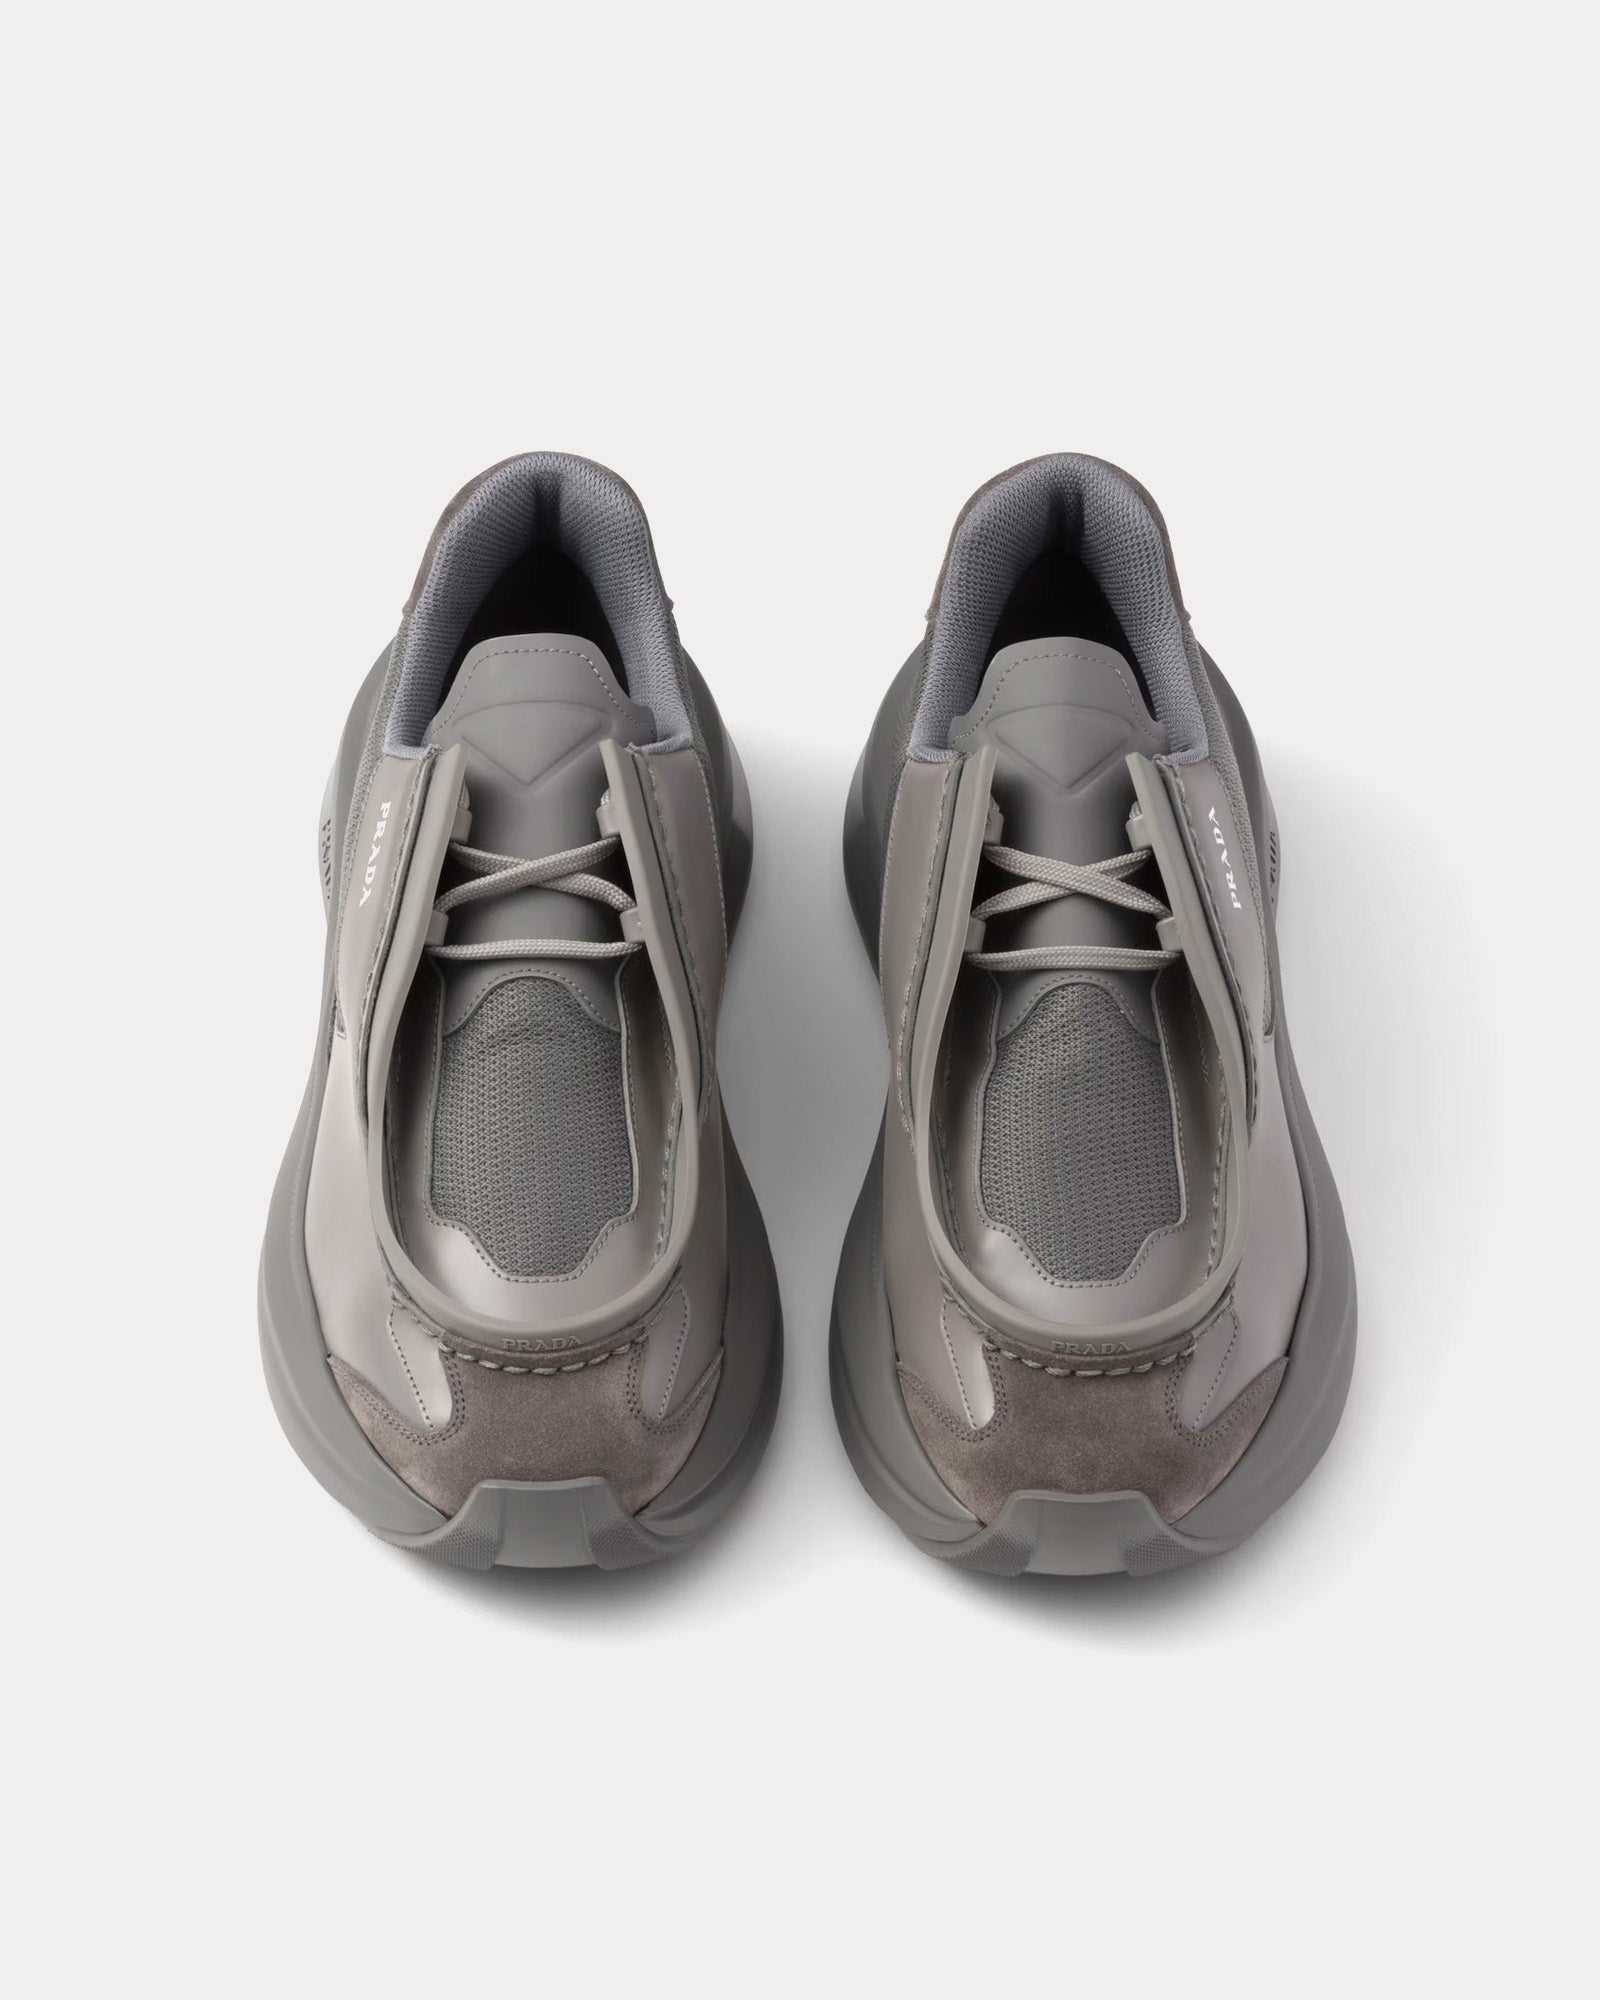 Prada - Systeme Brushed Leather with Bike Fabric & Suede Elements Marble Grey Low Top Sneakers